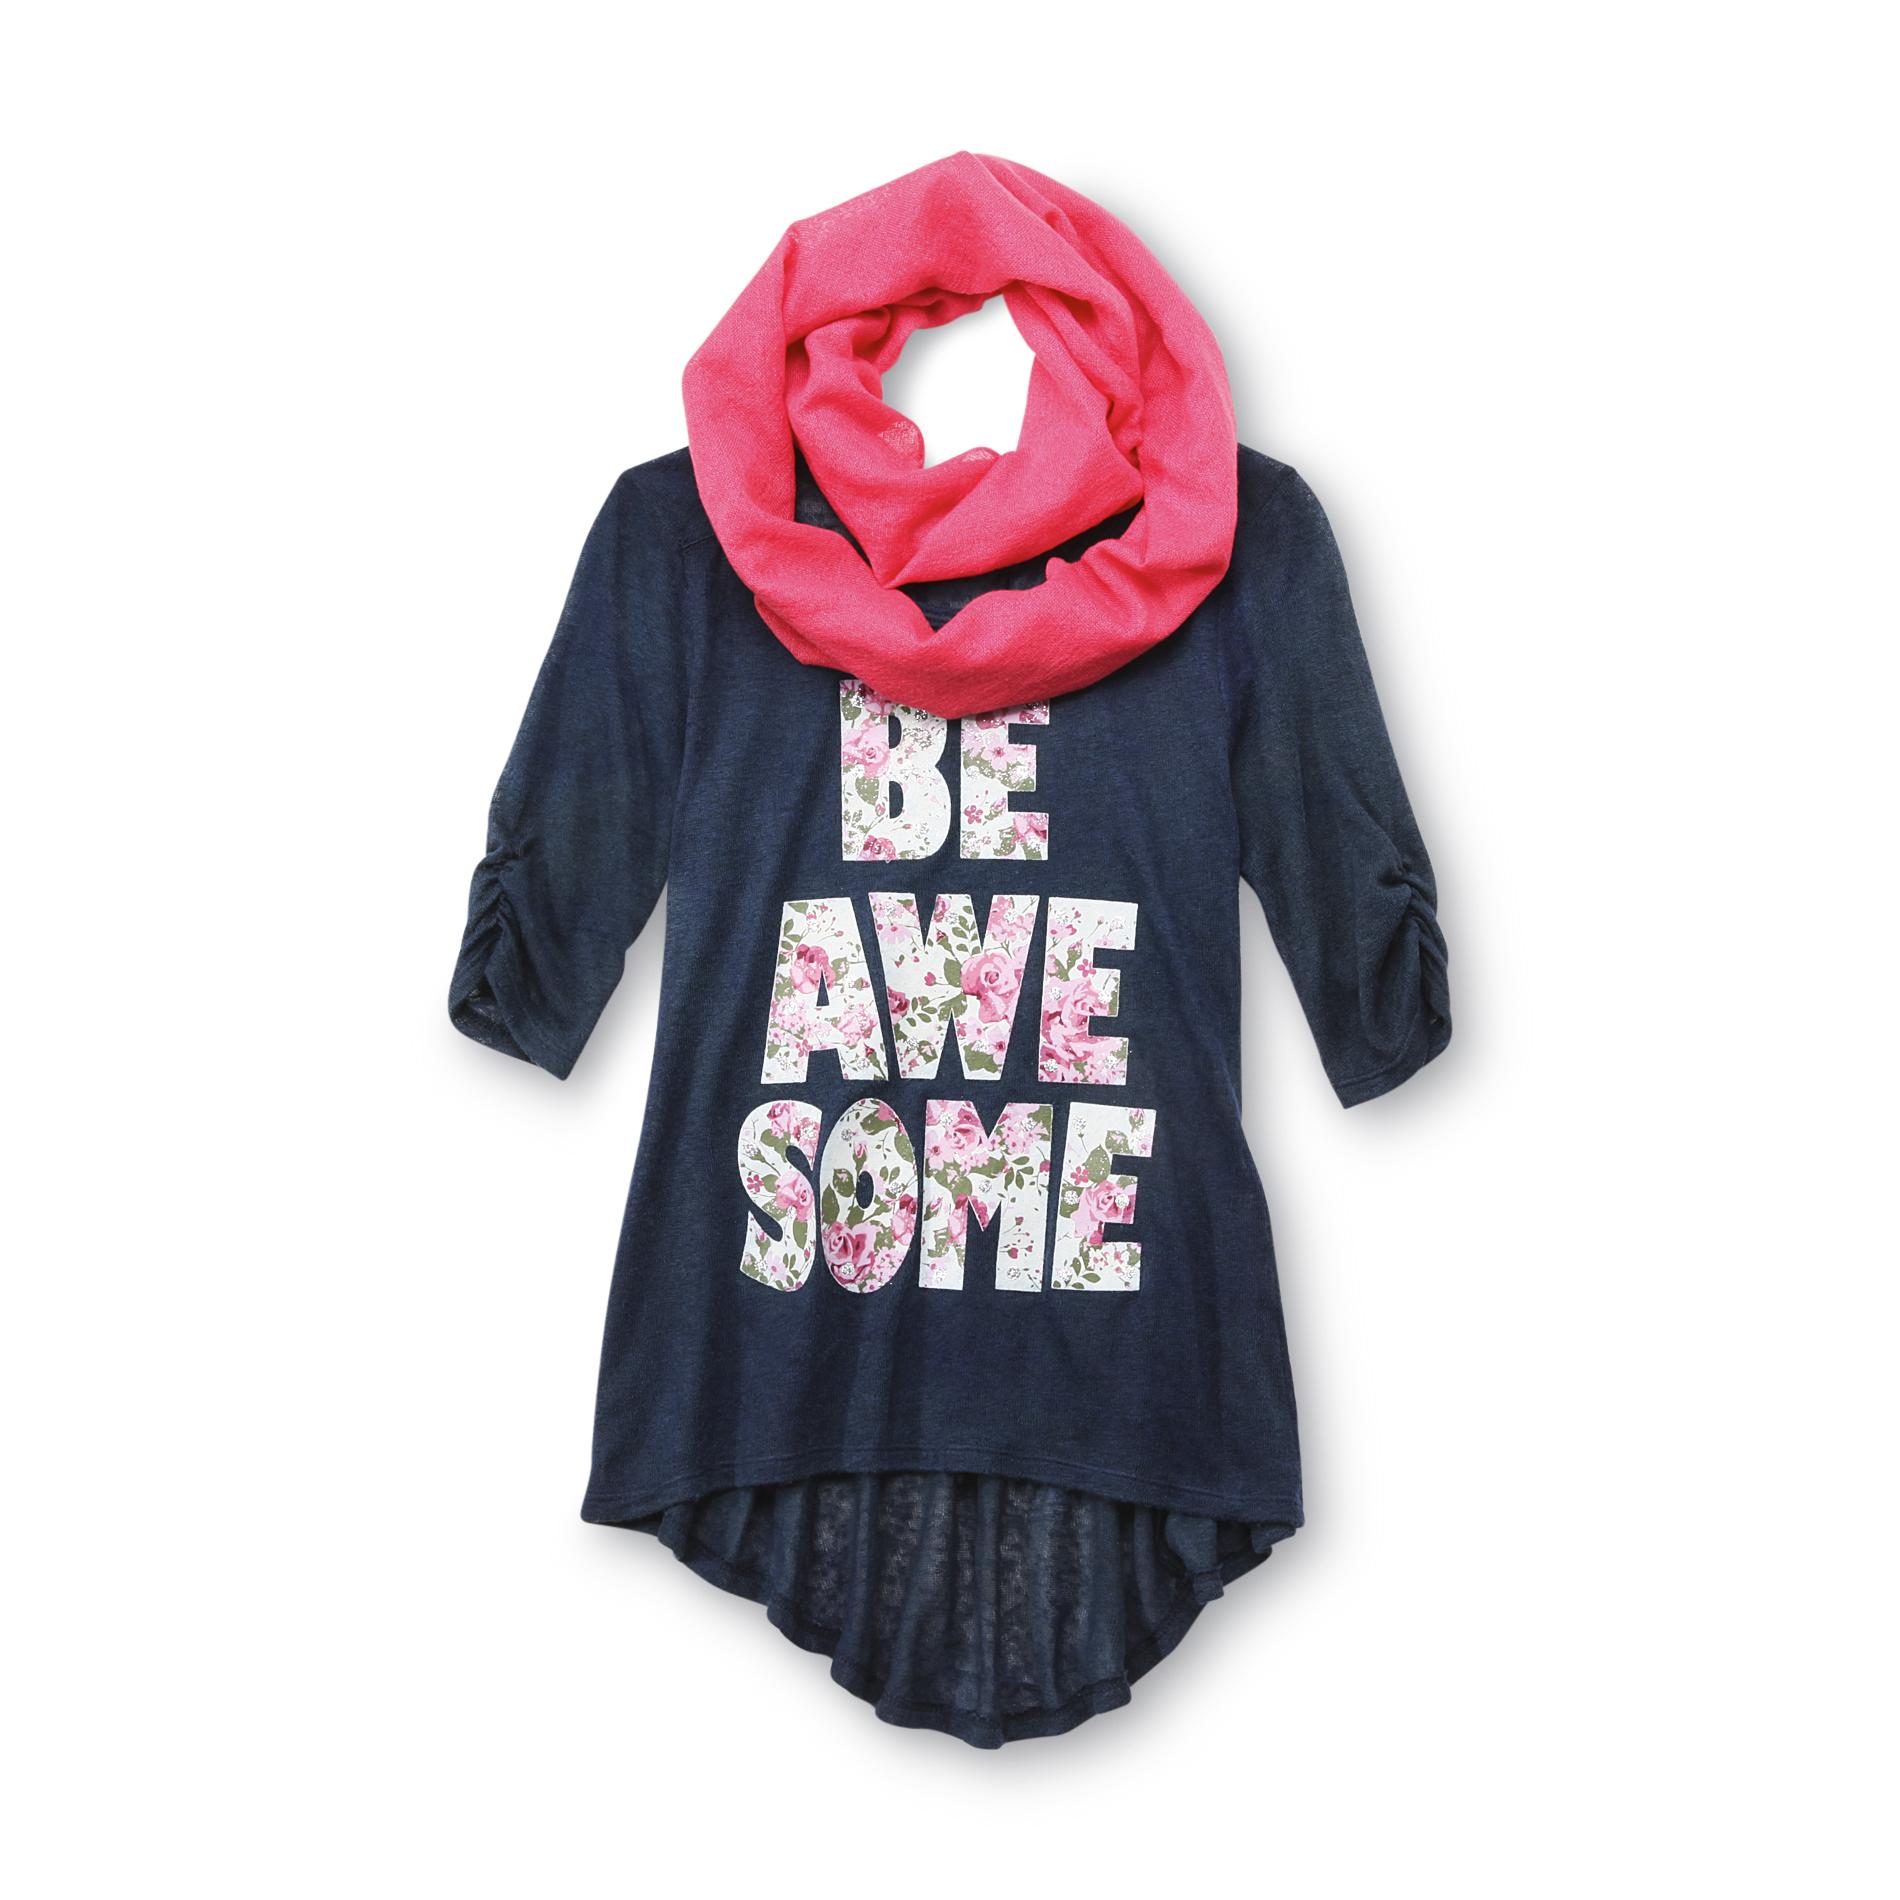 Knitworks Kids Girl's Knit Top & Infinity Scarf - Floral